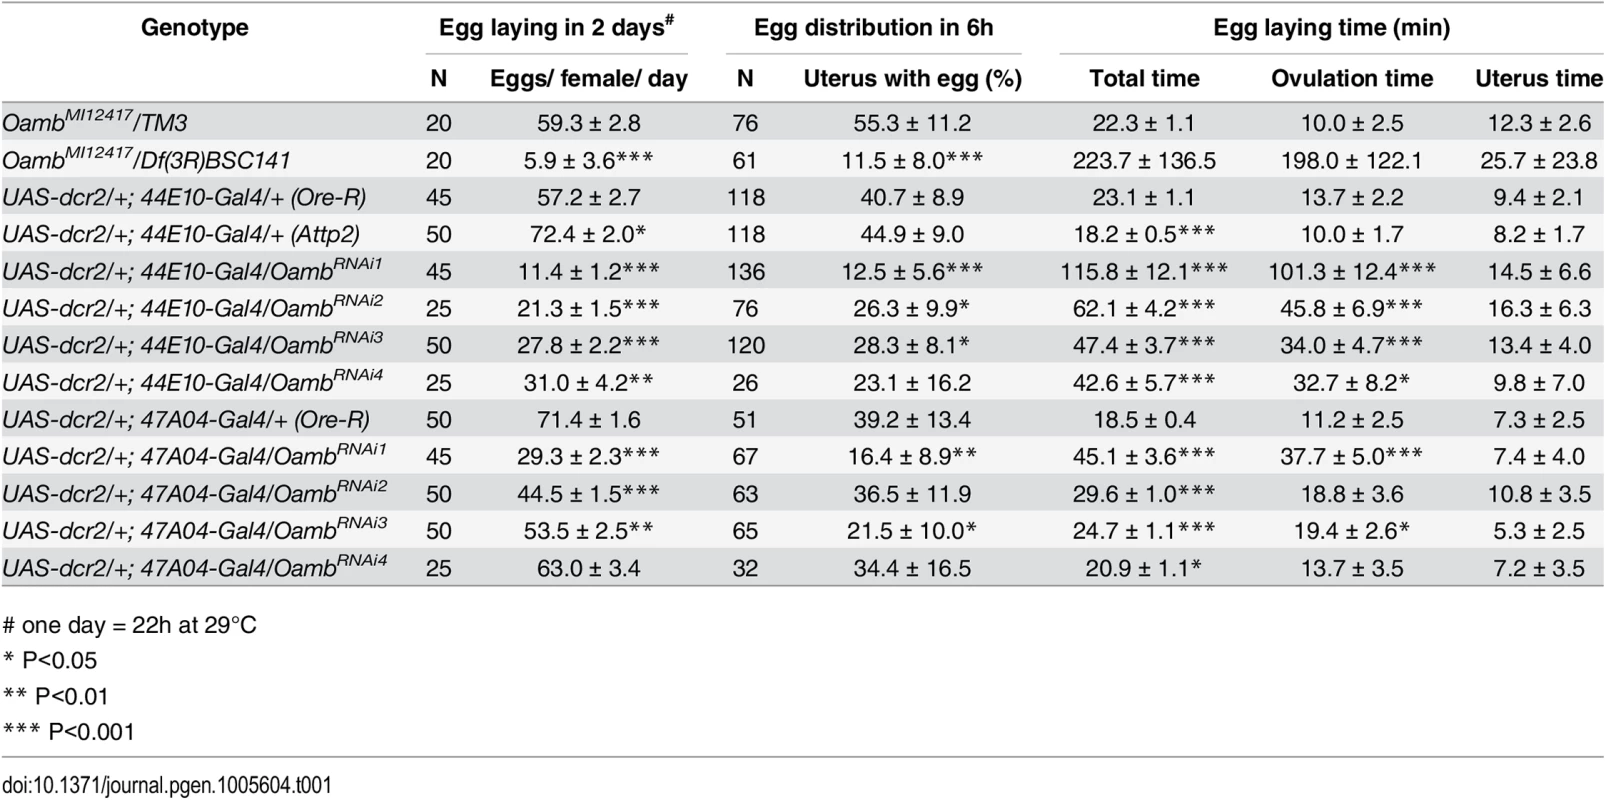 The effect of follicular adrenergic signaling on egg laying, egg distribution in the reproductive tract, and egg laying time.